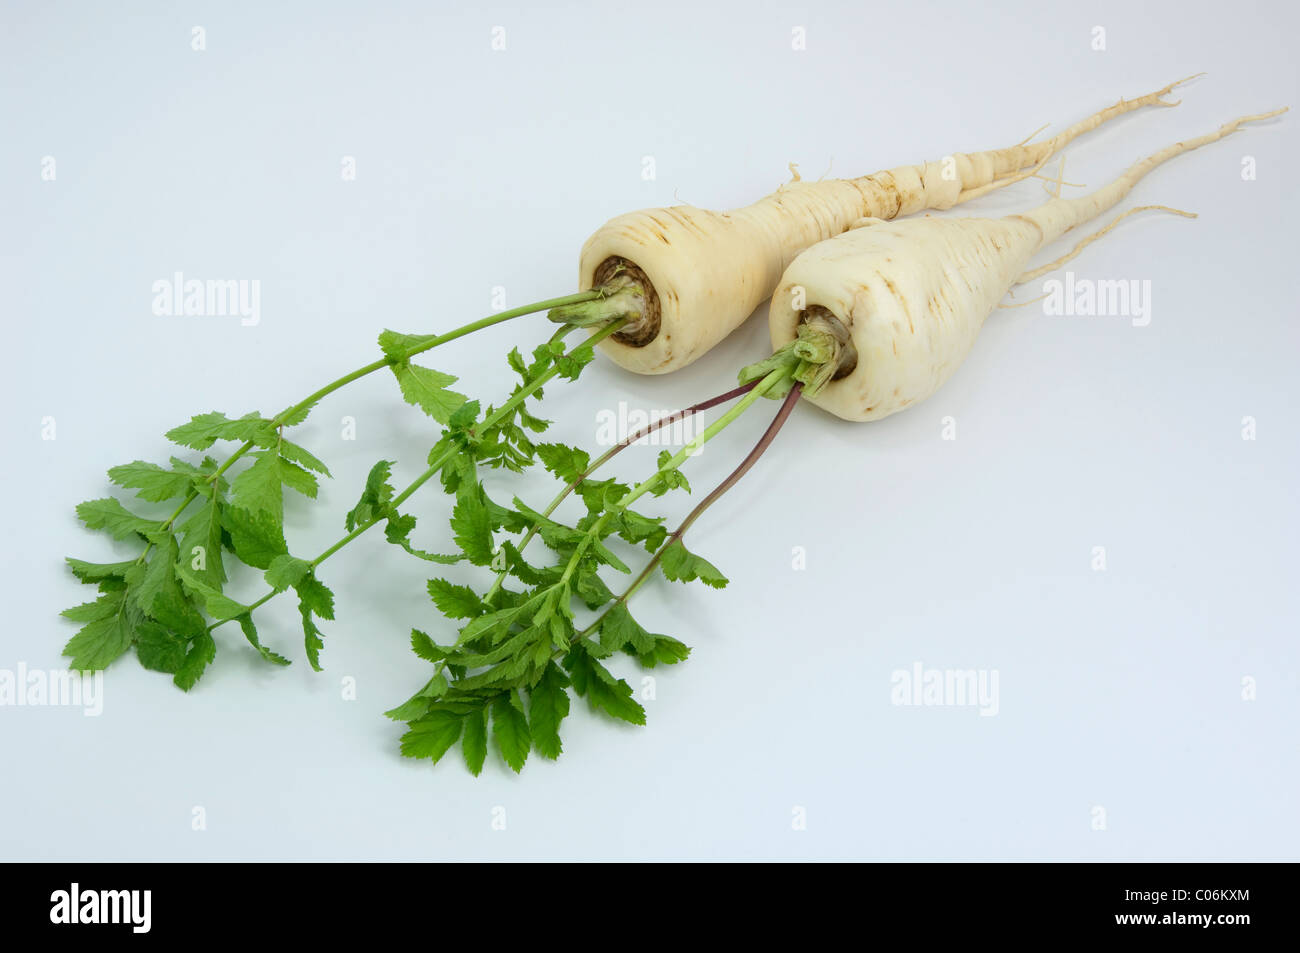 Parsnip (Pastinaca sativa). Carrot-like edible roots with leaves. Studio picture against a white background Stock Photo